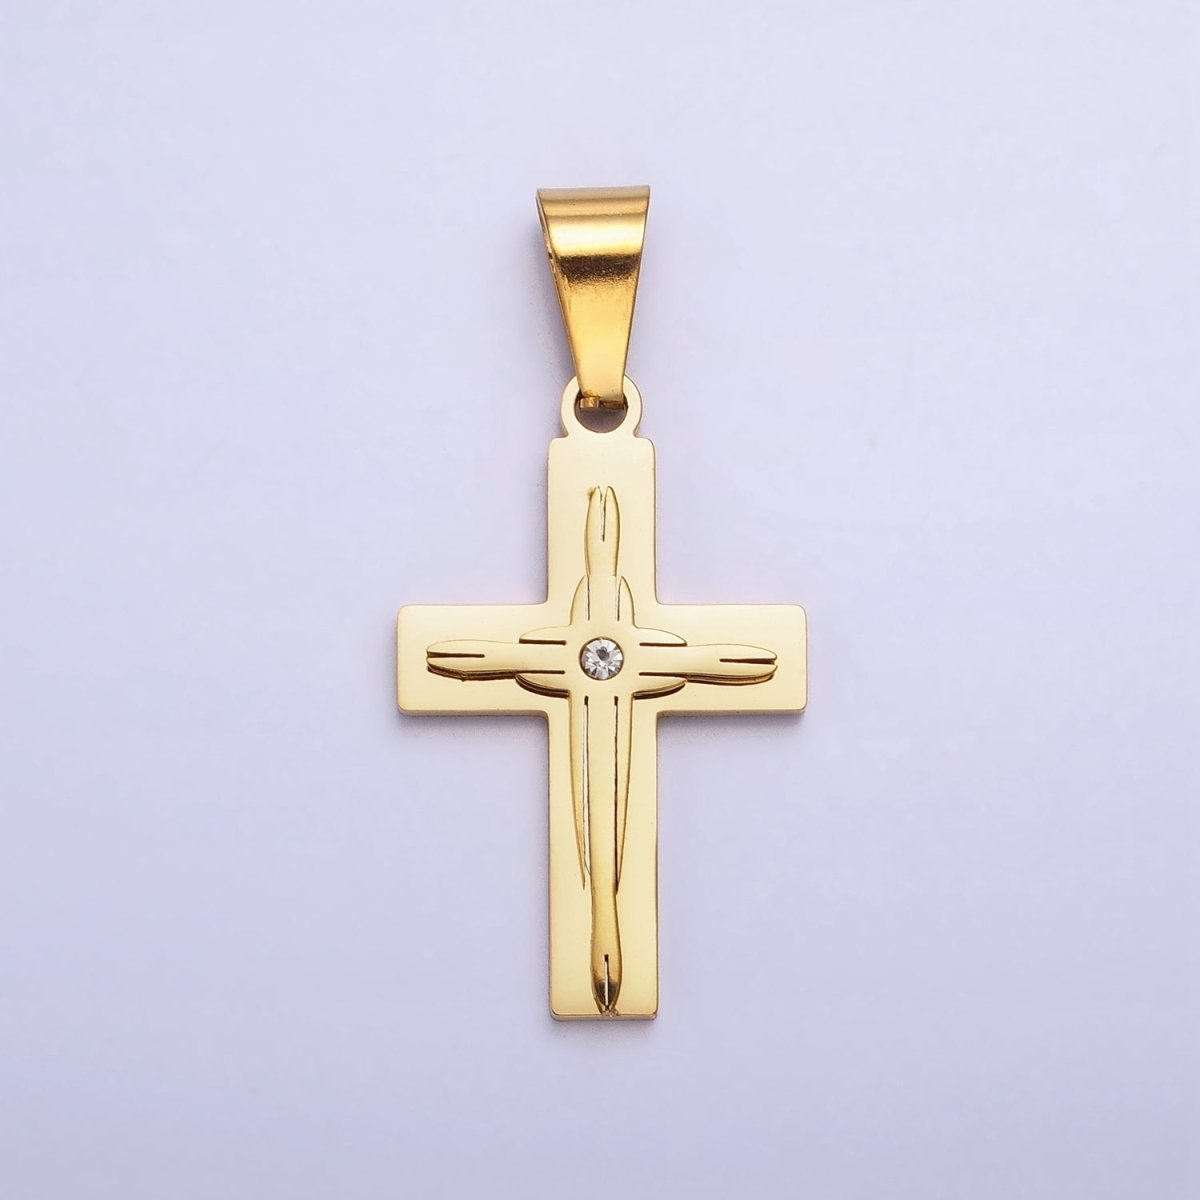 Stainless Steel Cross Pendant in Gold Silver for Unisex Statement Religious Jewelry Making | P-1117 - DLUXCA